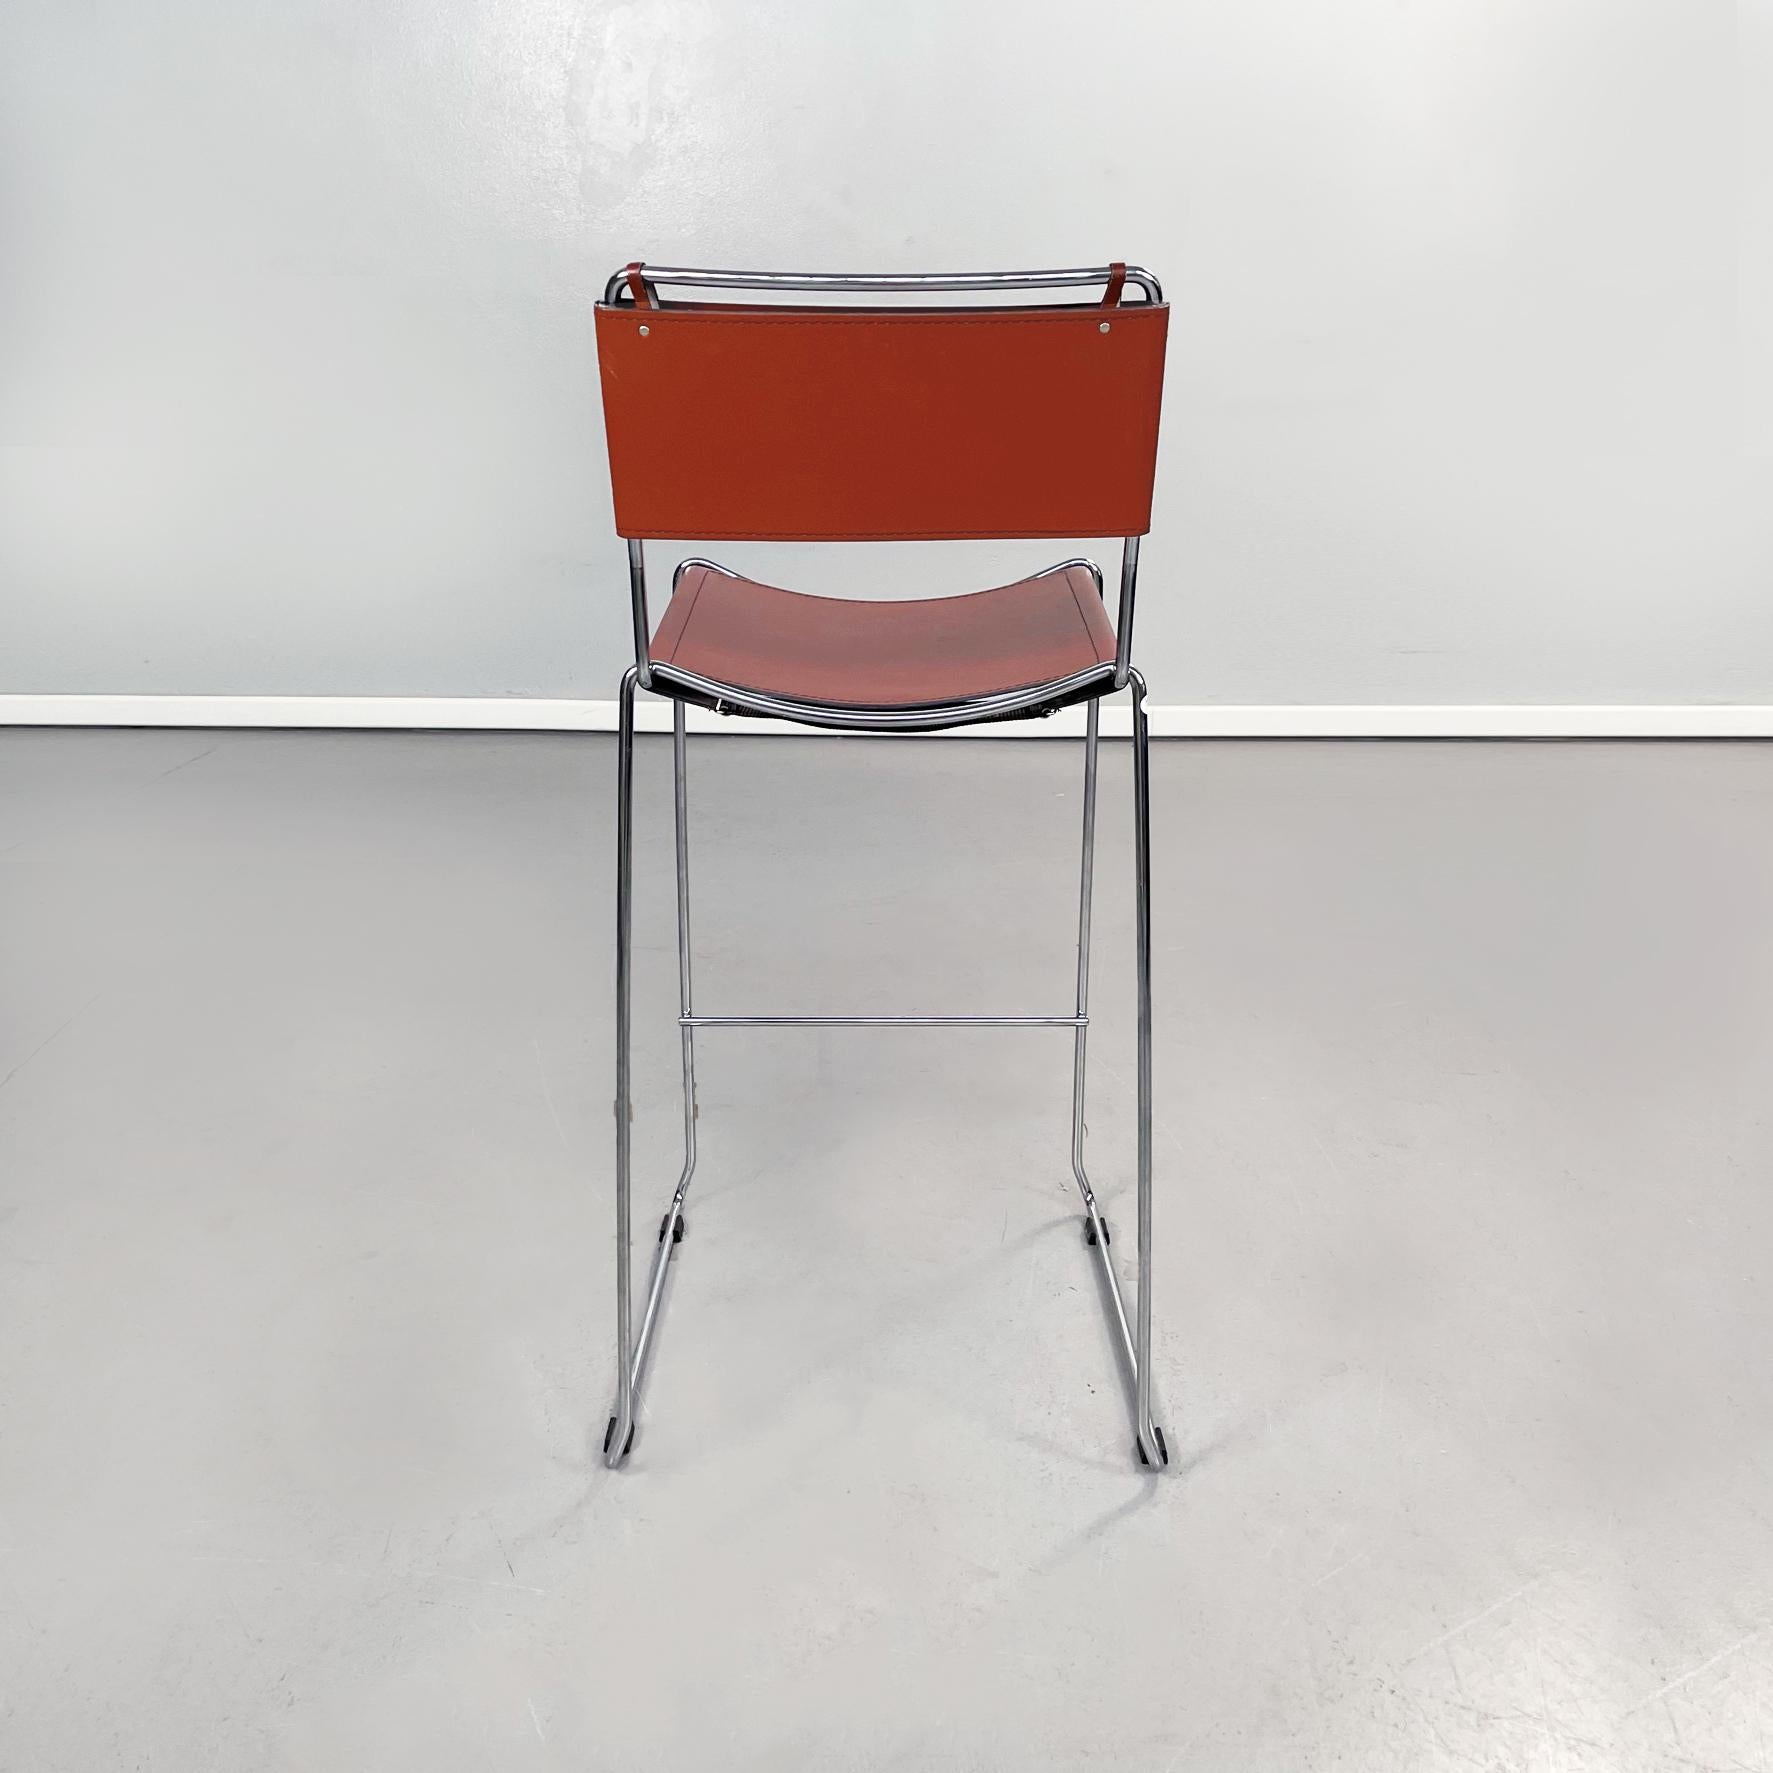 Late 20th Century Italian Mid-Century Modern Brown Leather and Steel High Stool, 1980s For Sale